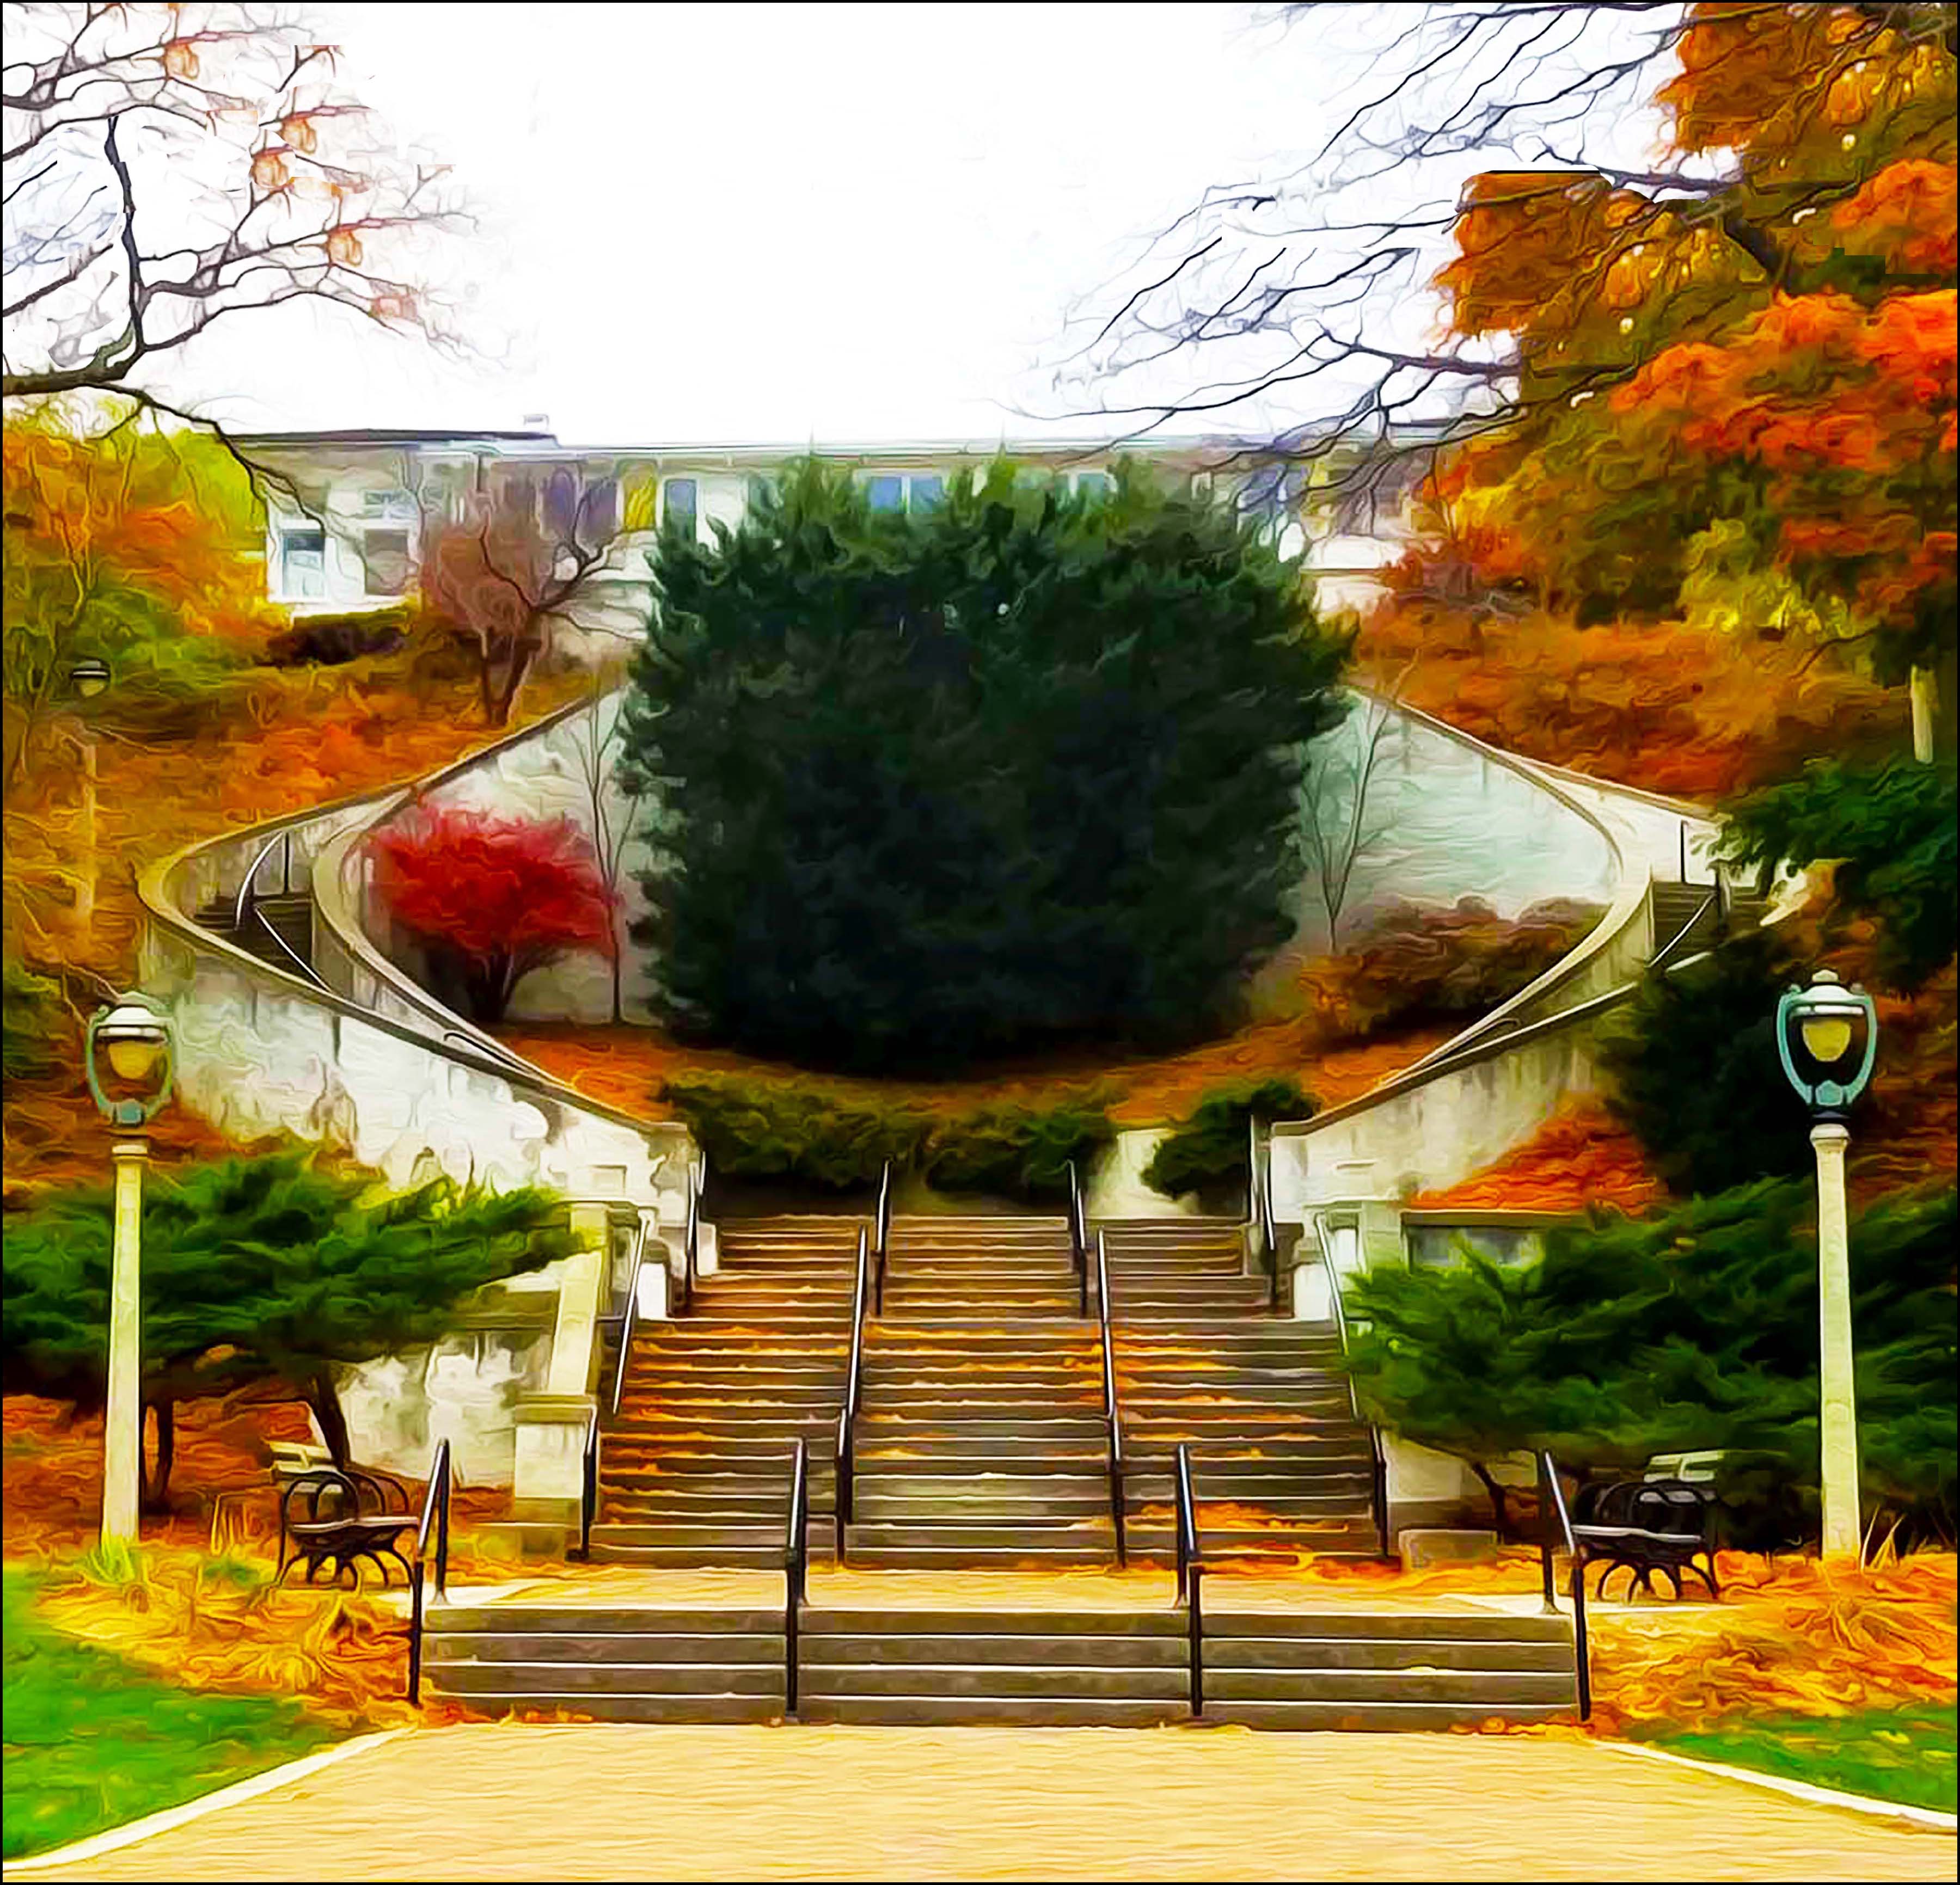 Picture of Lake Park's Pavilion and the Grand Staircase leading to the lakefront.